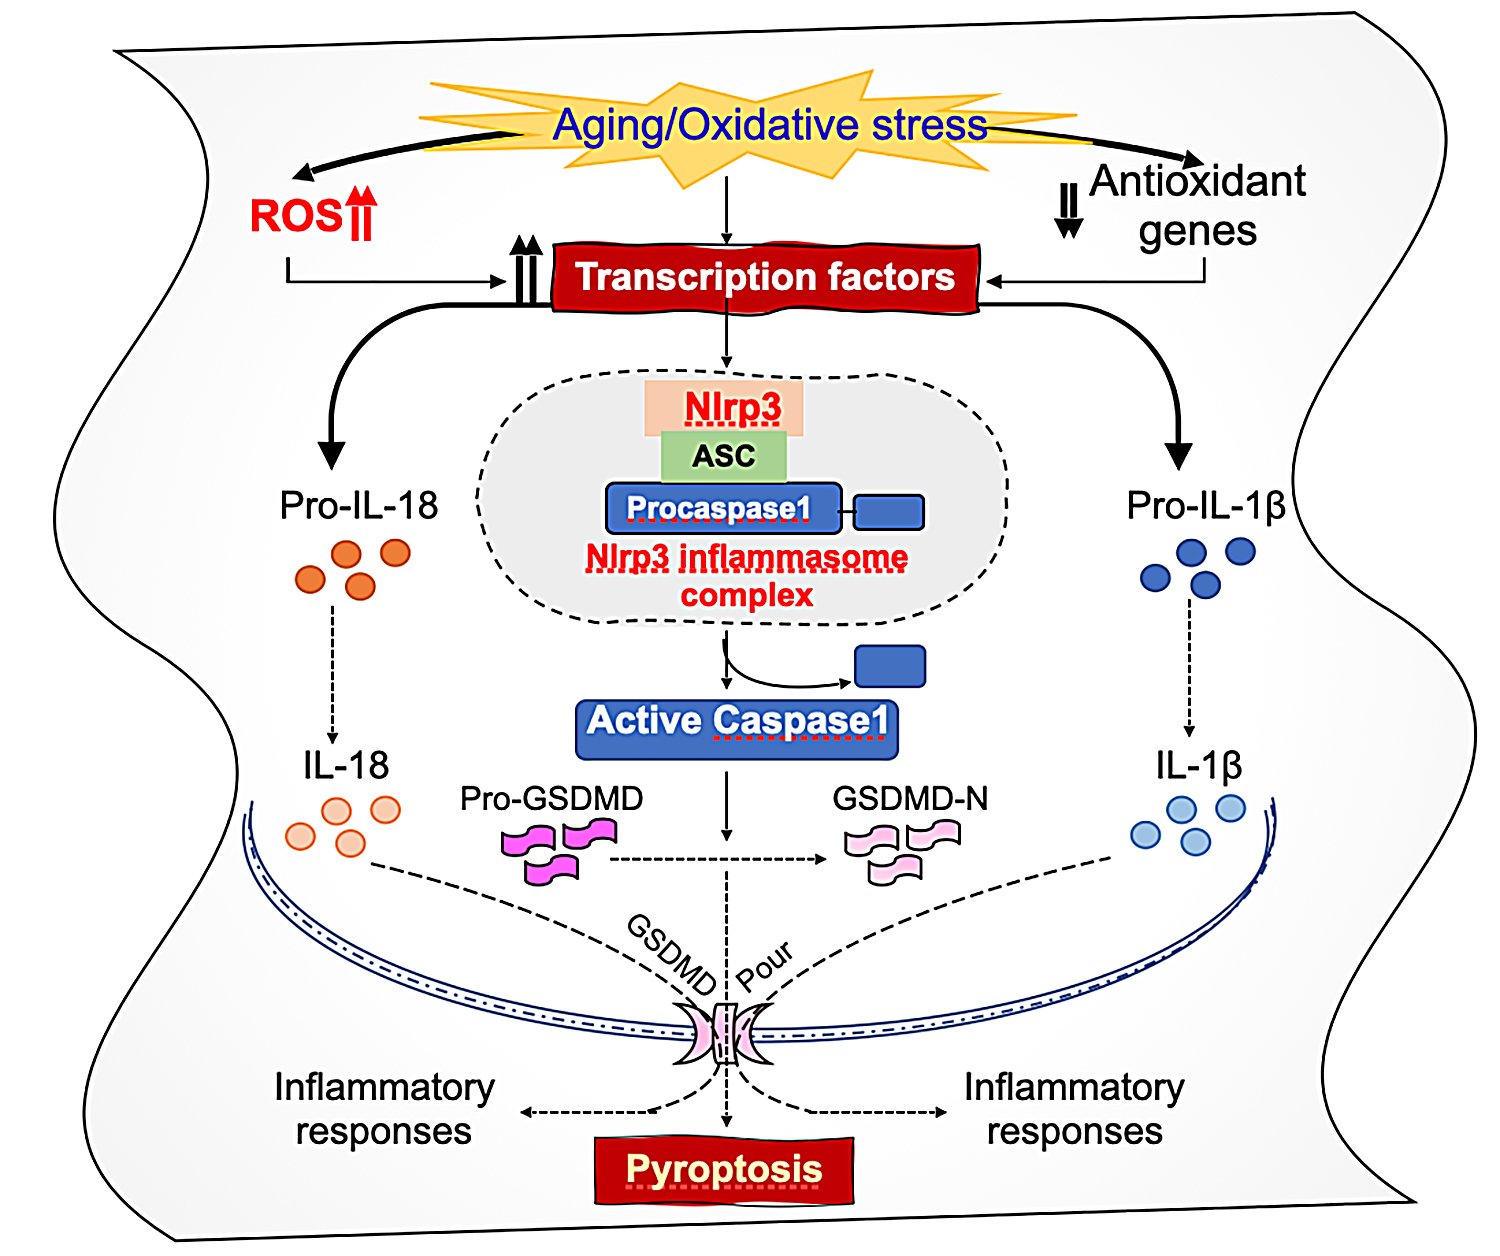 Graphic of progression of oxidative stress-and aging-induced augmented Nlrp3 inflammasome activation and pathobiology in the eye lens, as described in text.